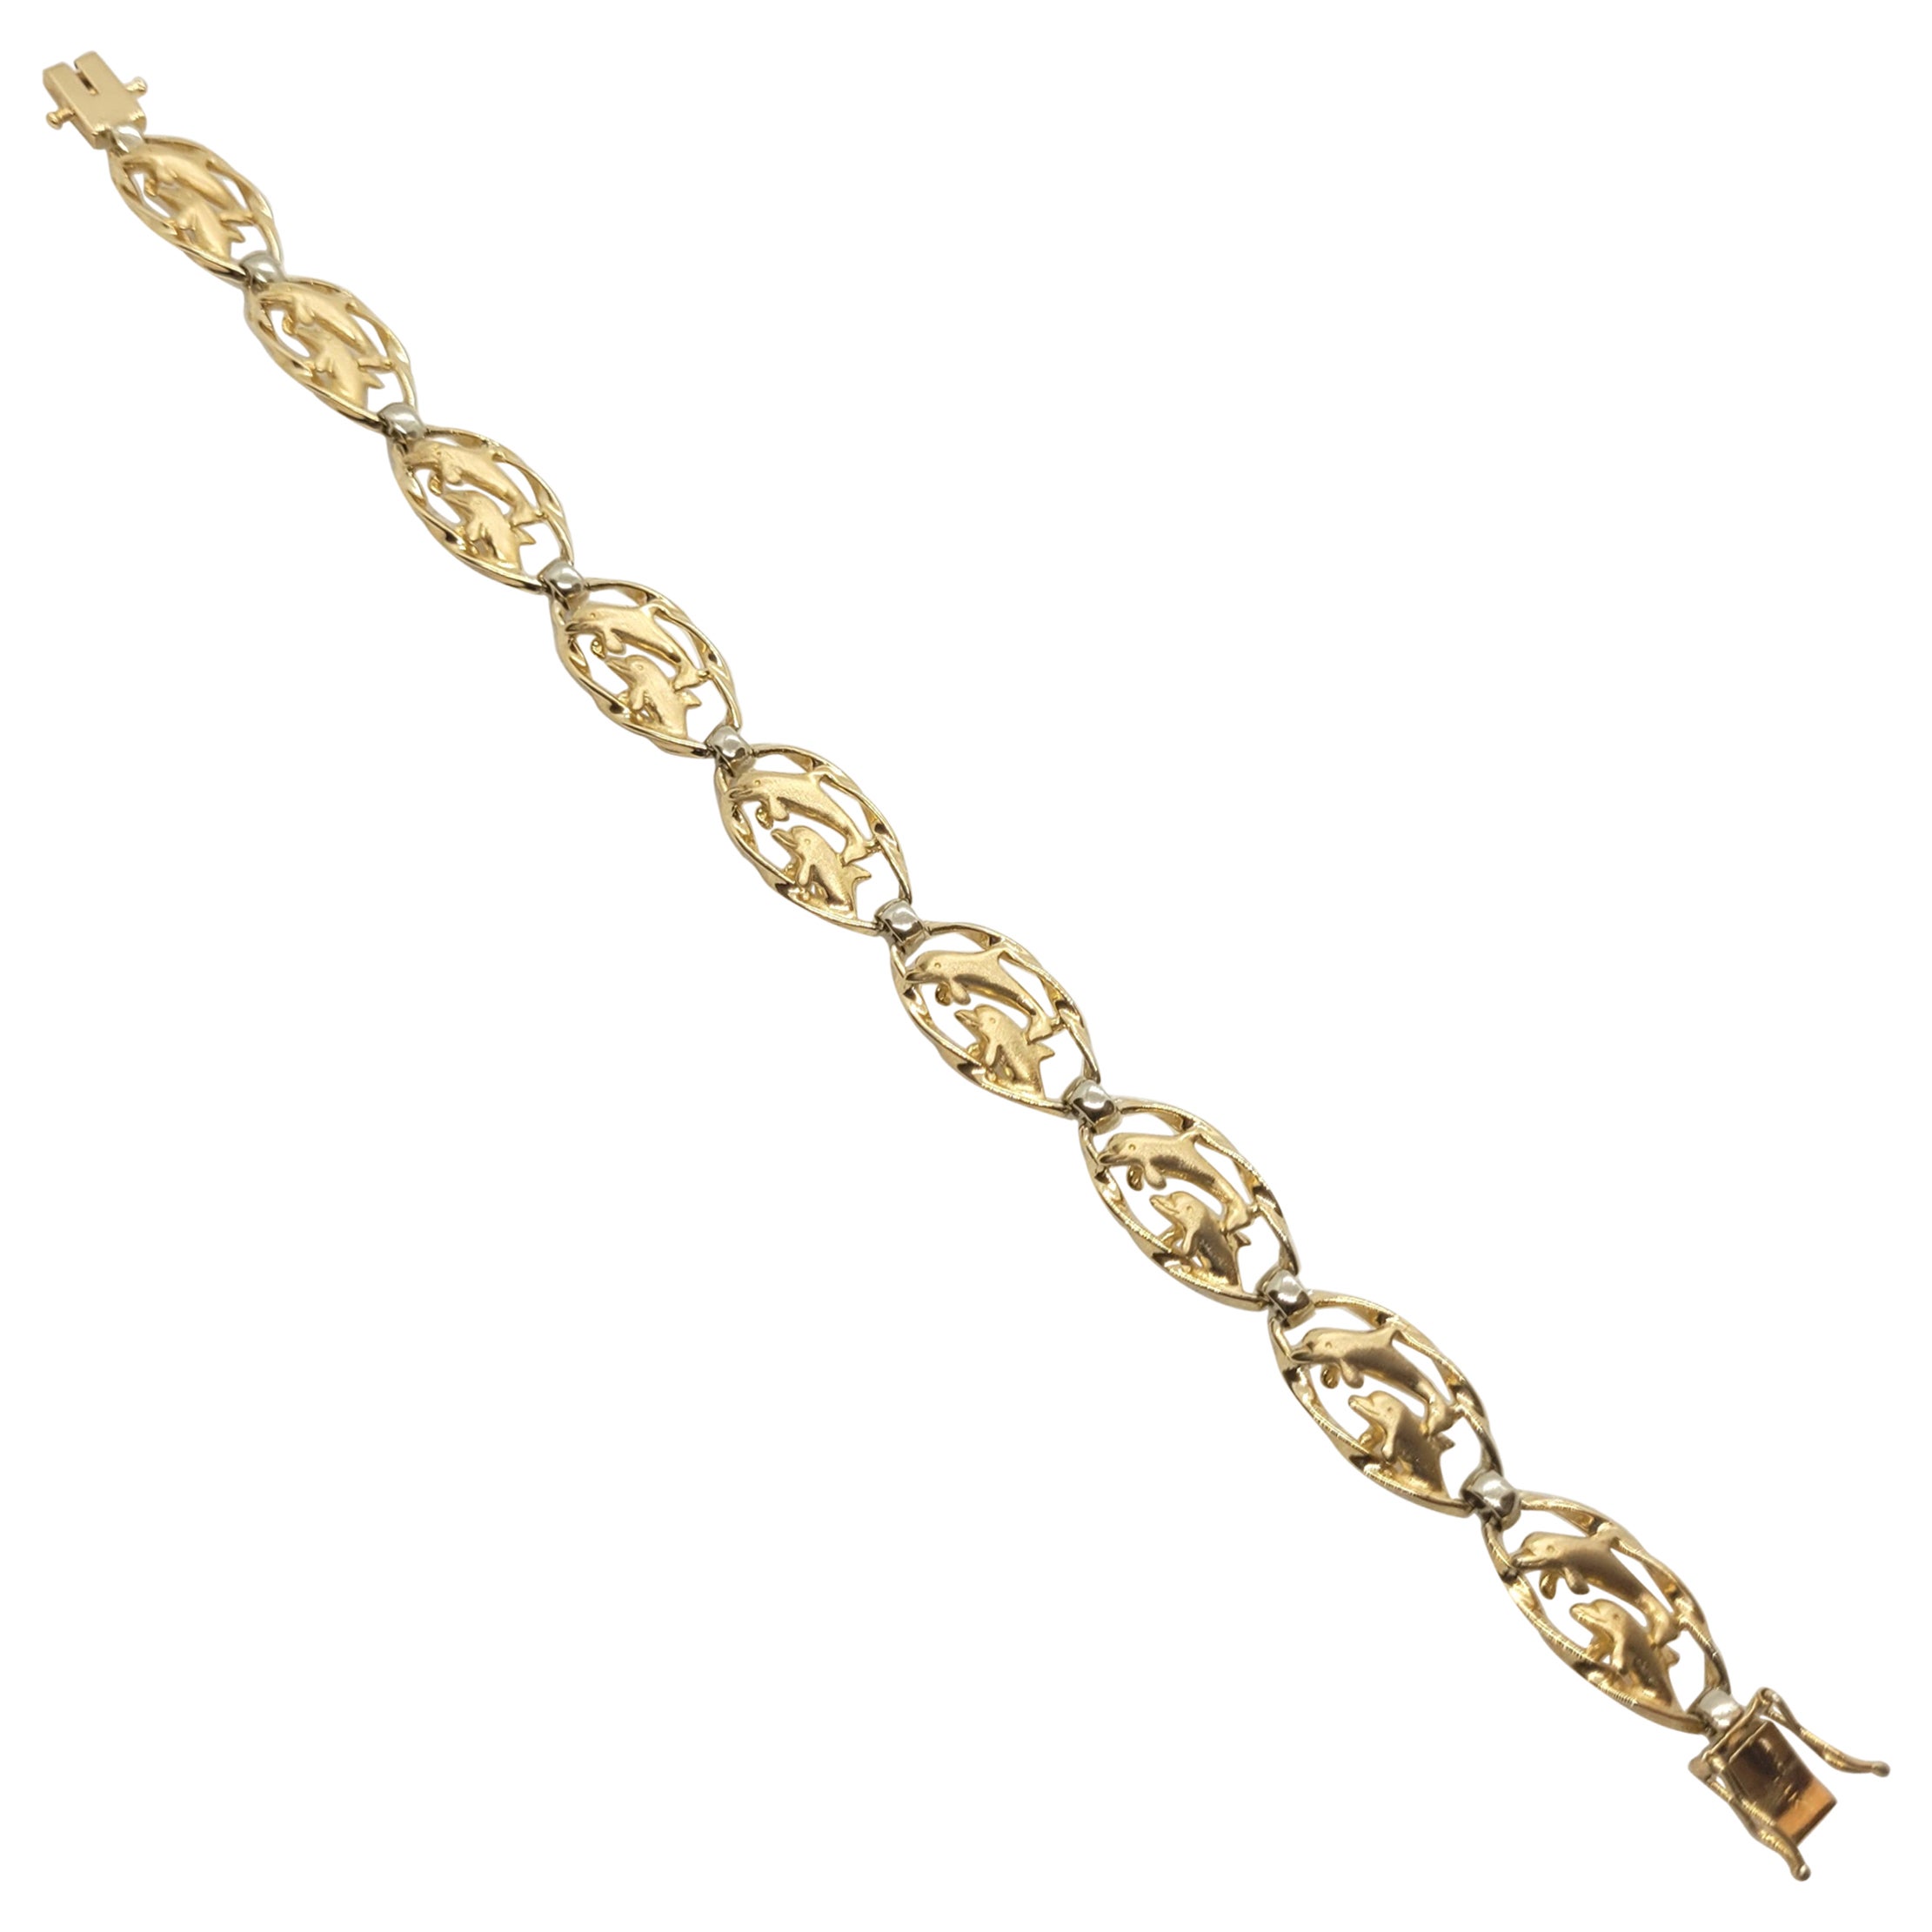 14kt Two Tone Gold Dolphin Bracelet, 11.2 Grams, Safety